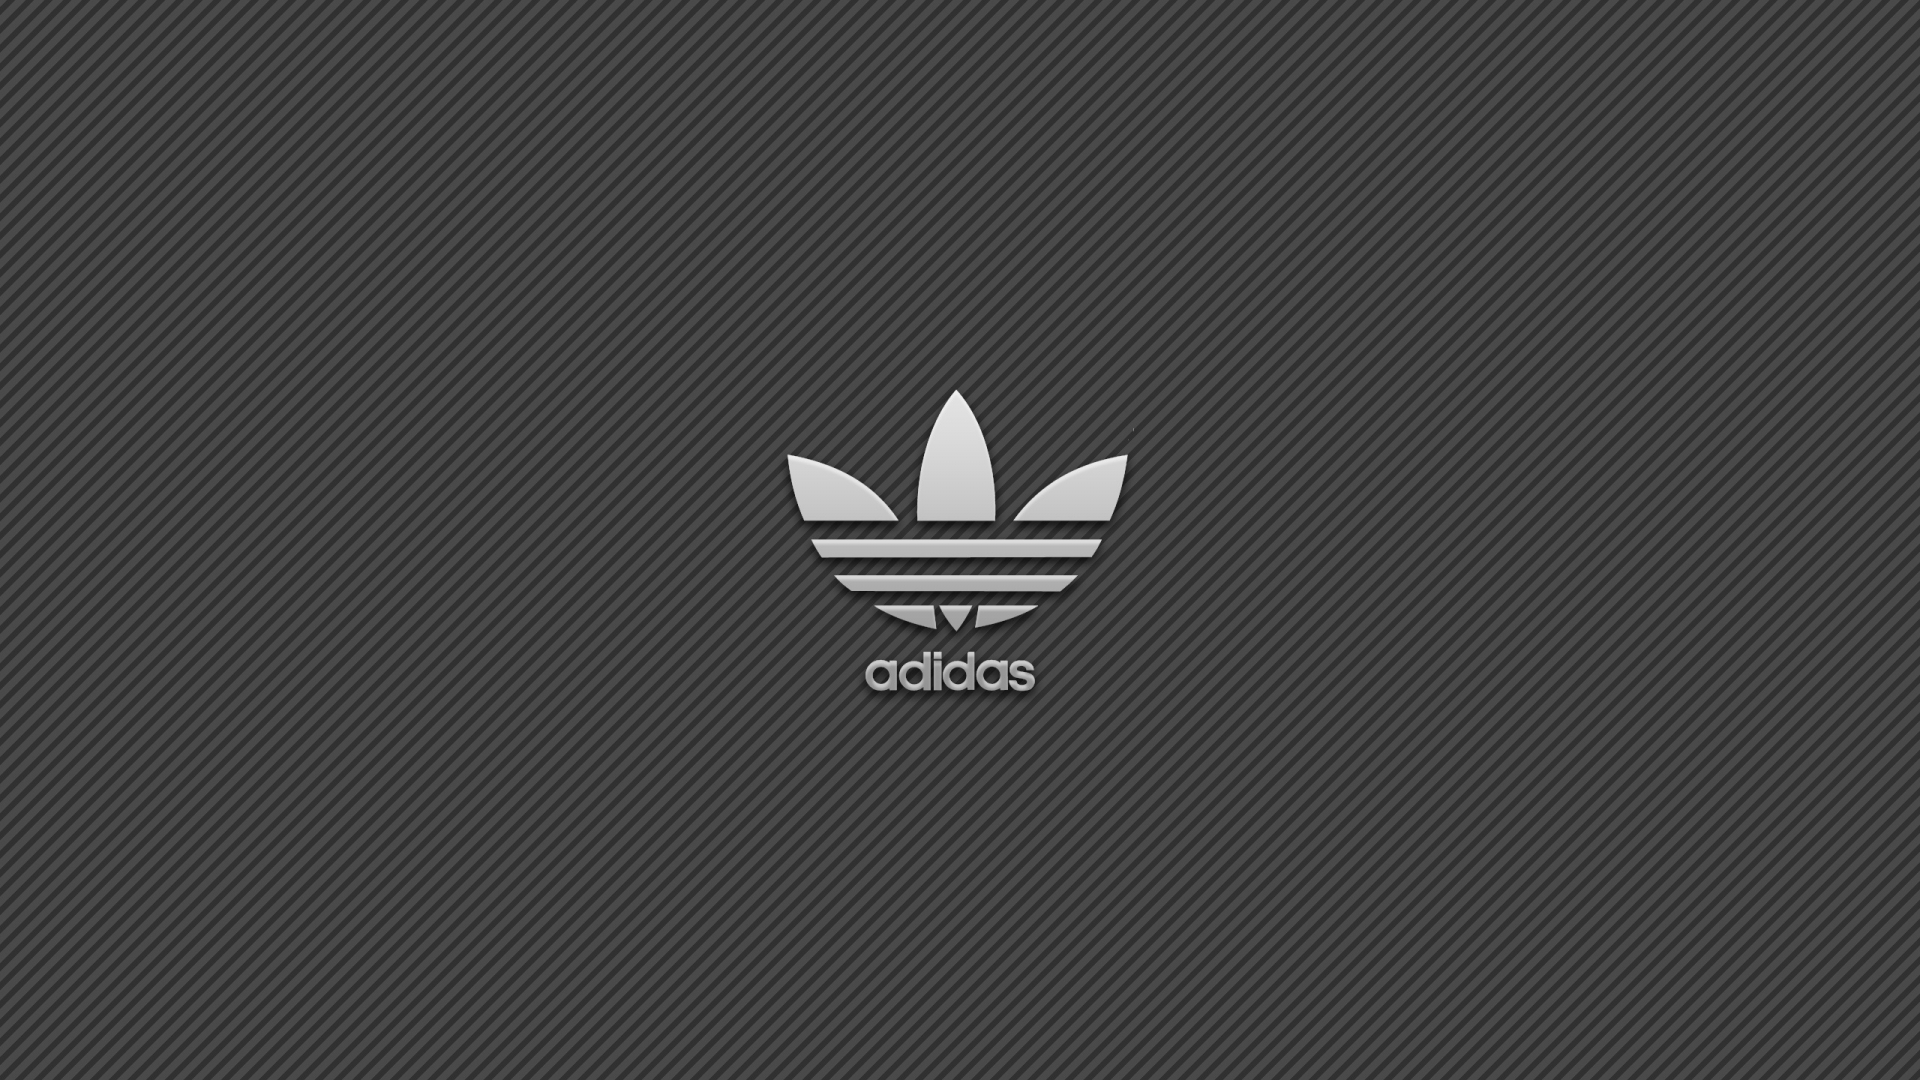 Adidas Simple Logo Background for 1920 x 1080 HDTV 1080p resolution